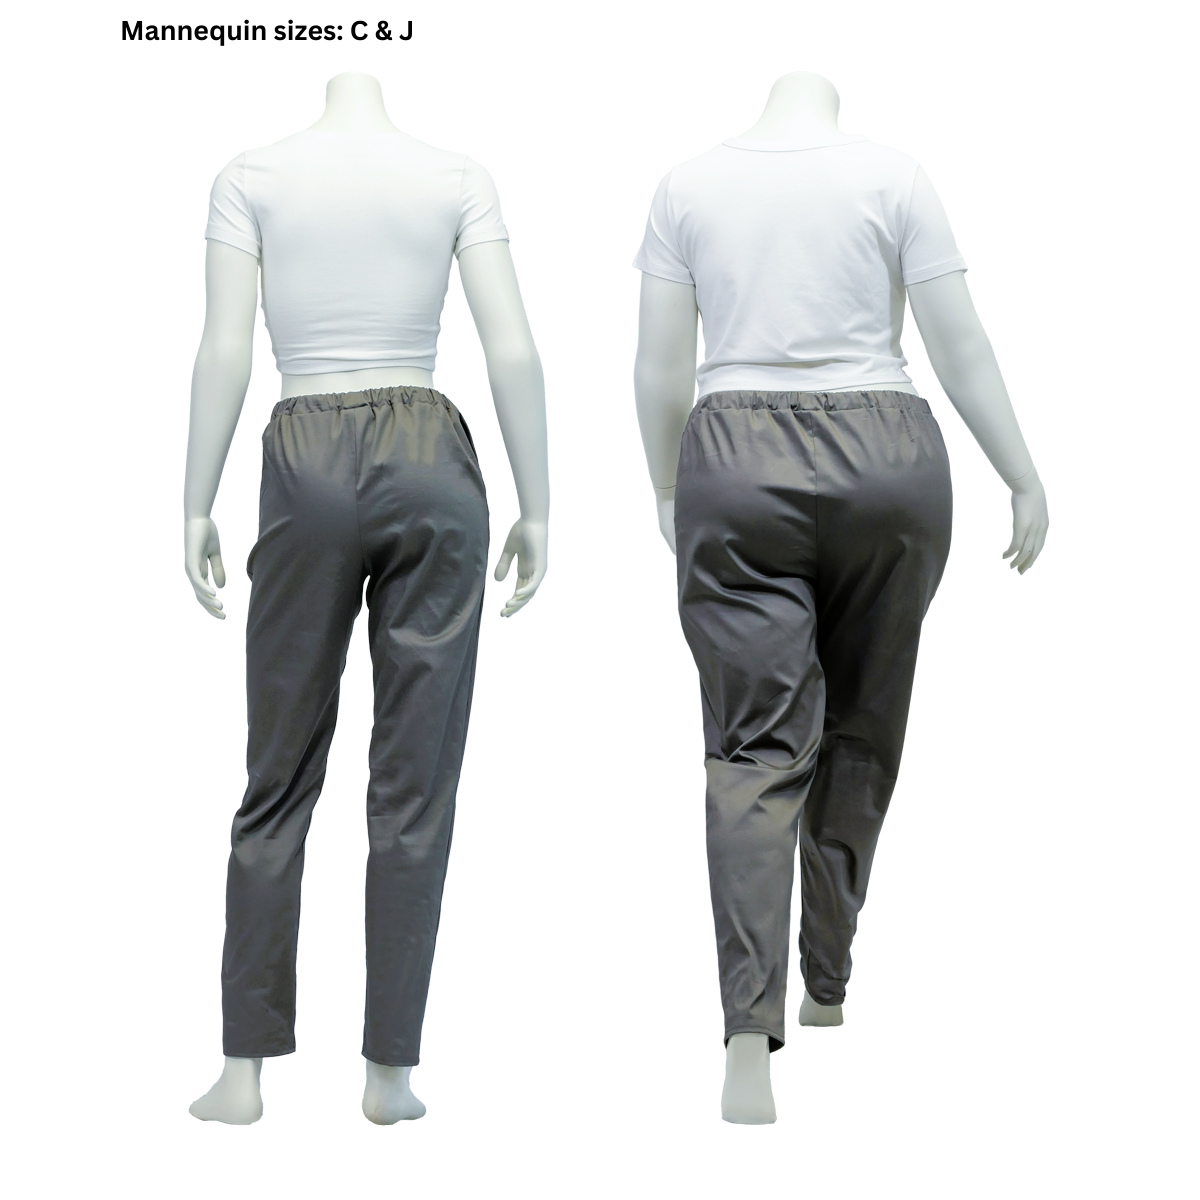 The reverse side of two completed FSCO Pants (f) on female mannequins in sizes C and J. Because of the way the mannequins are posed, it is easy to tell the relaxed, tapered fit of the pants.